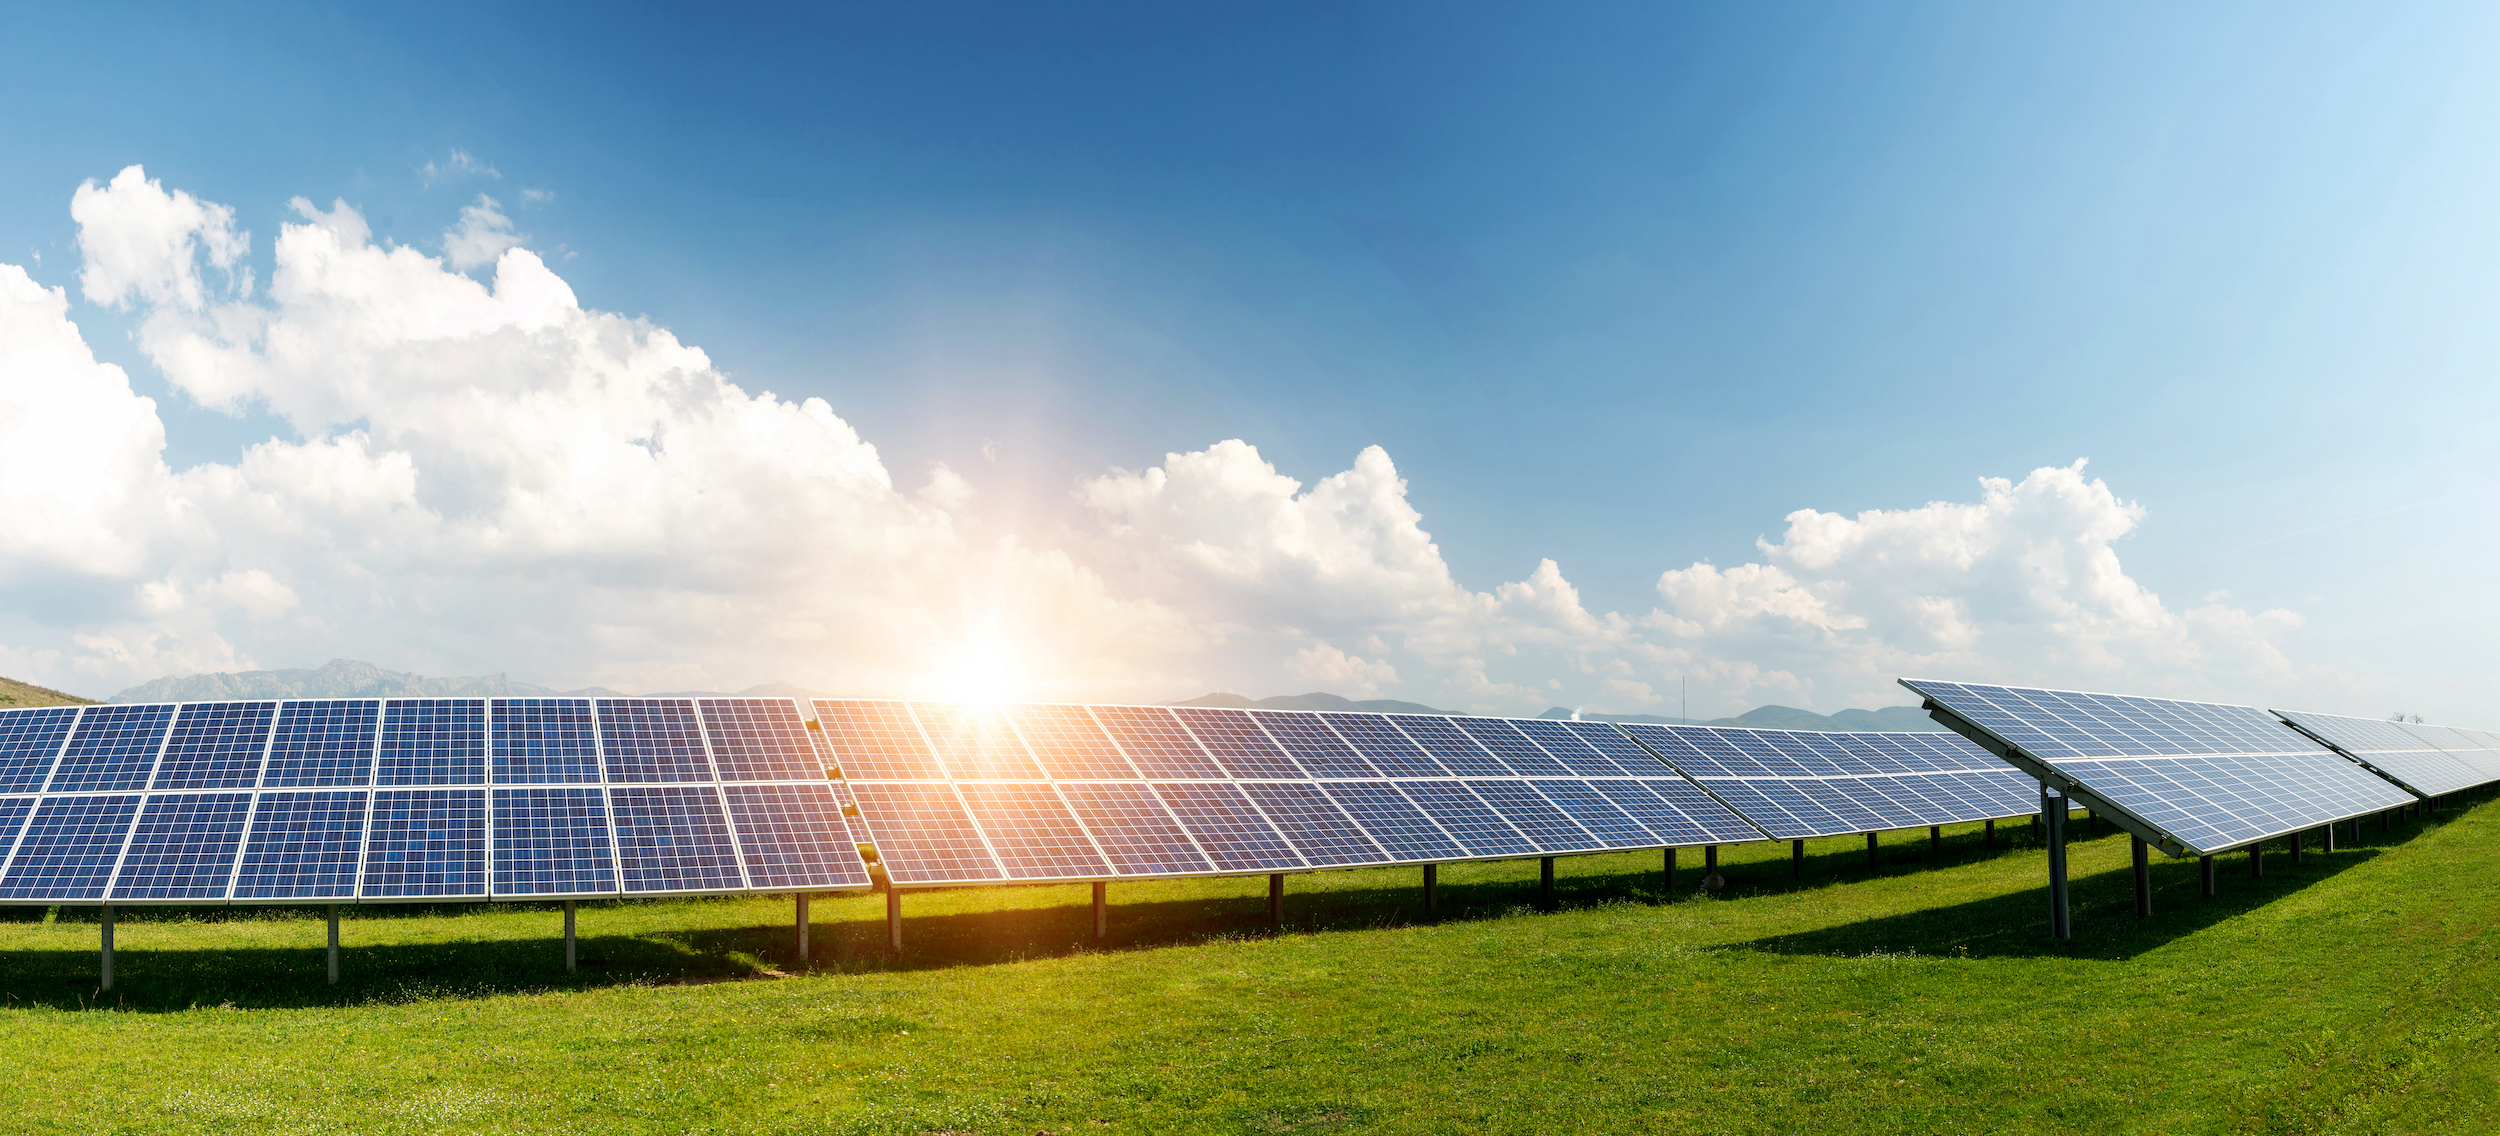 Get More Solar by Making Utilities Share Data